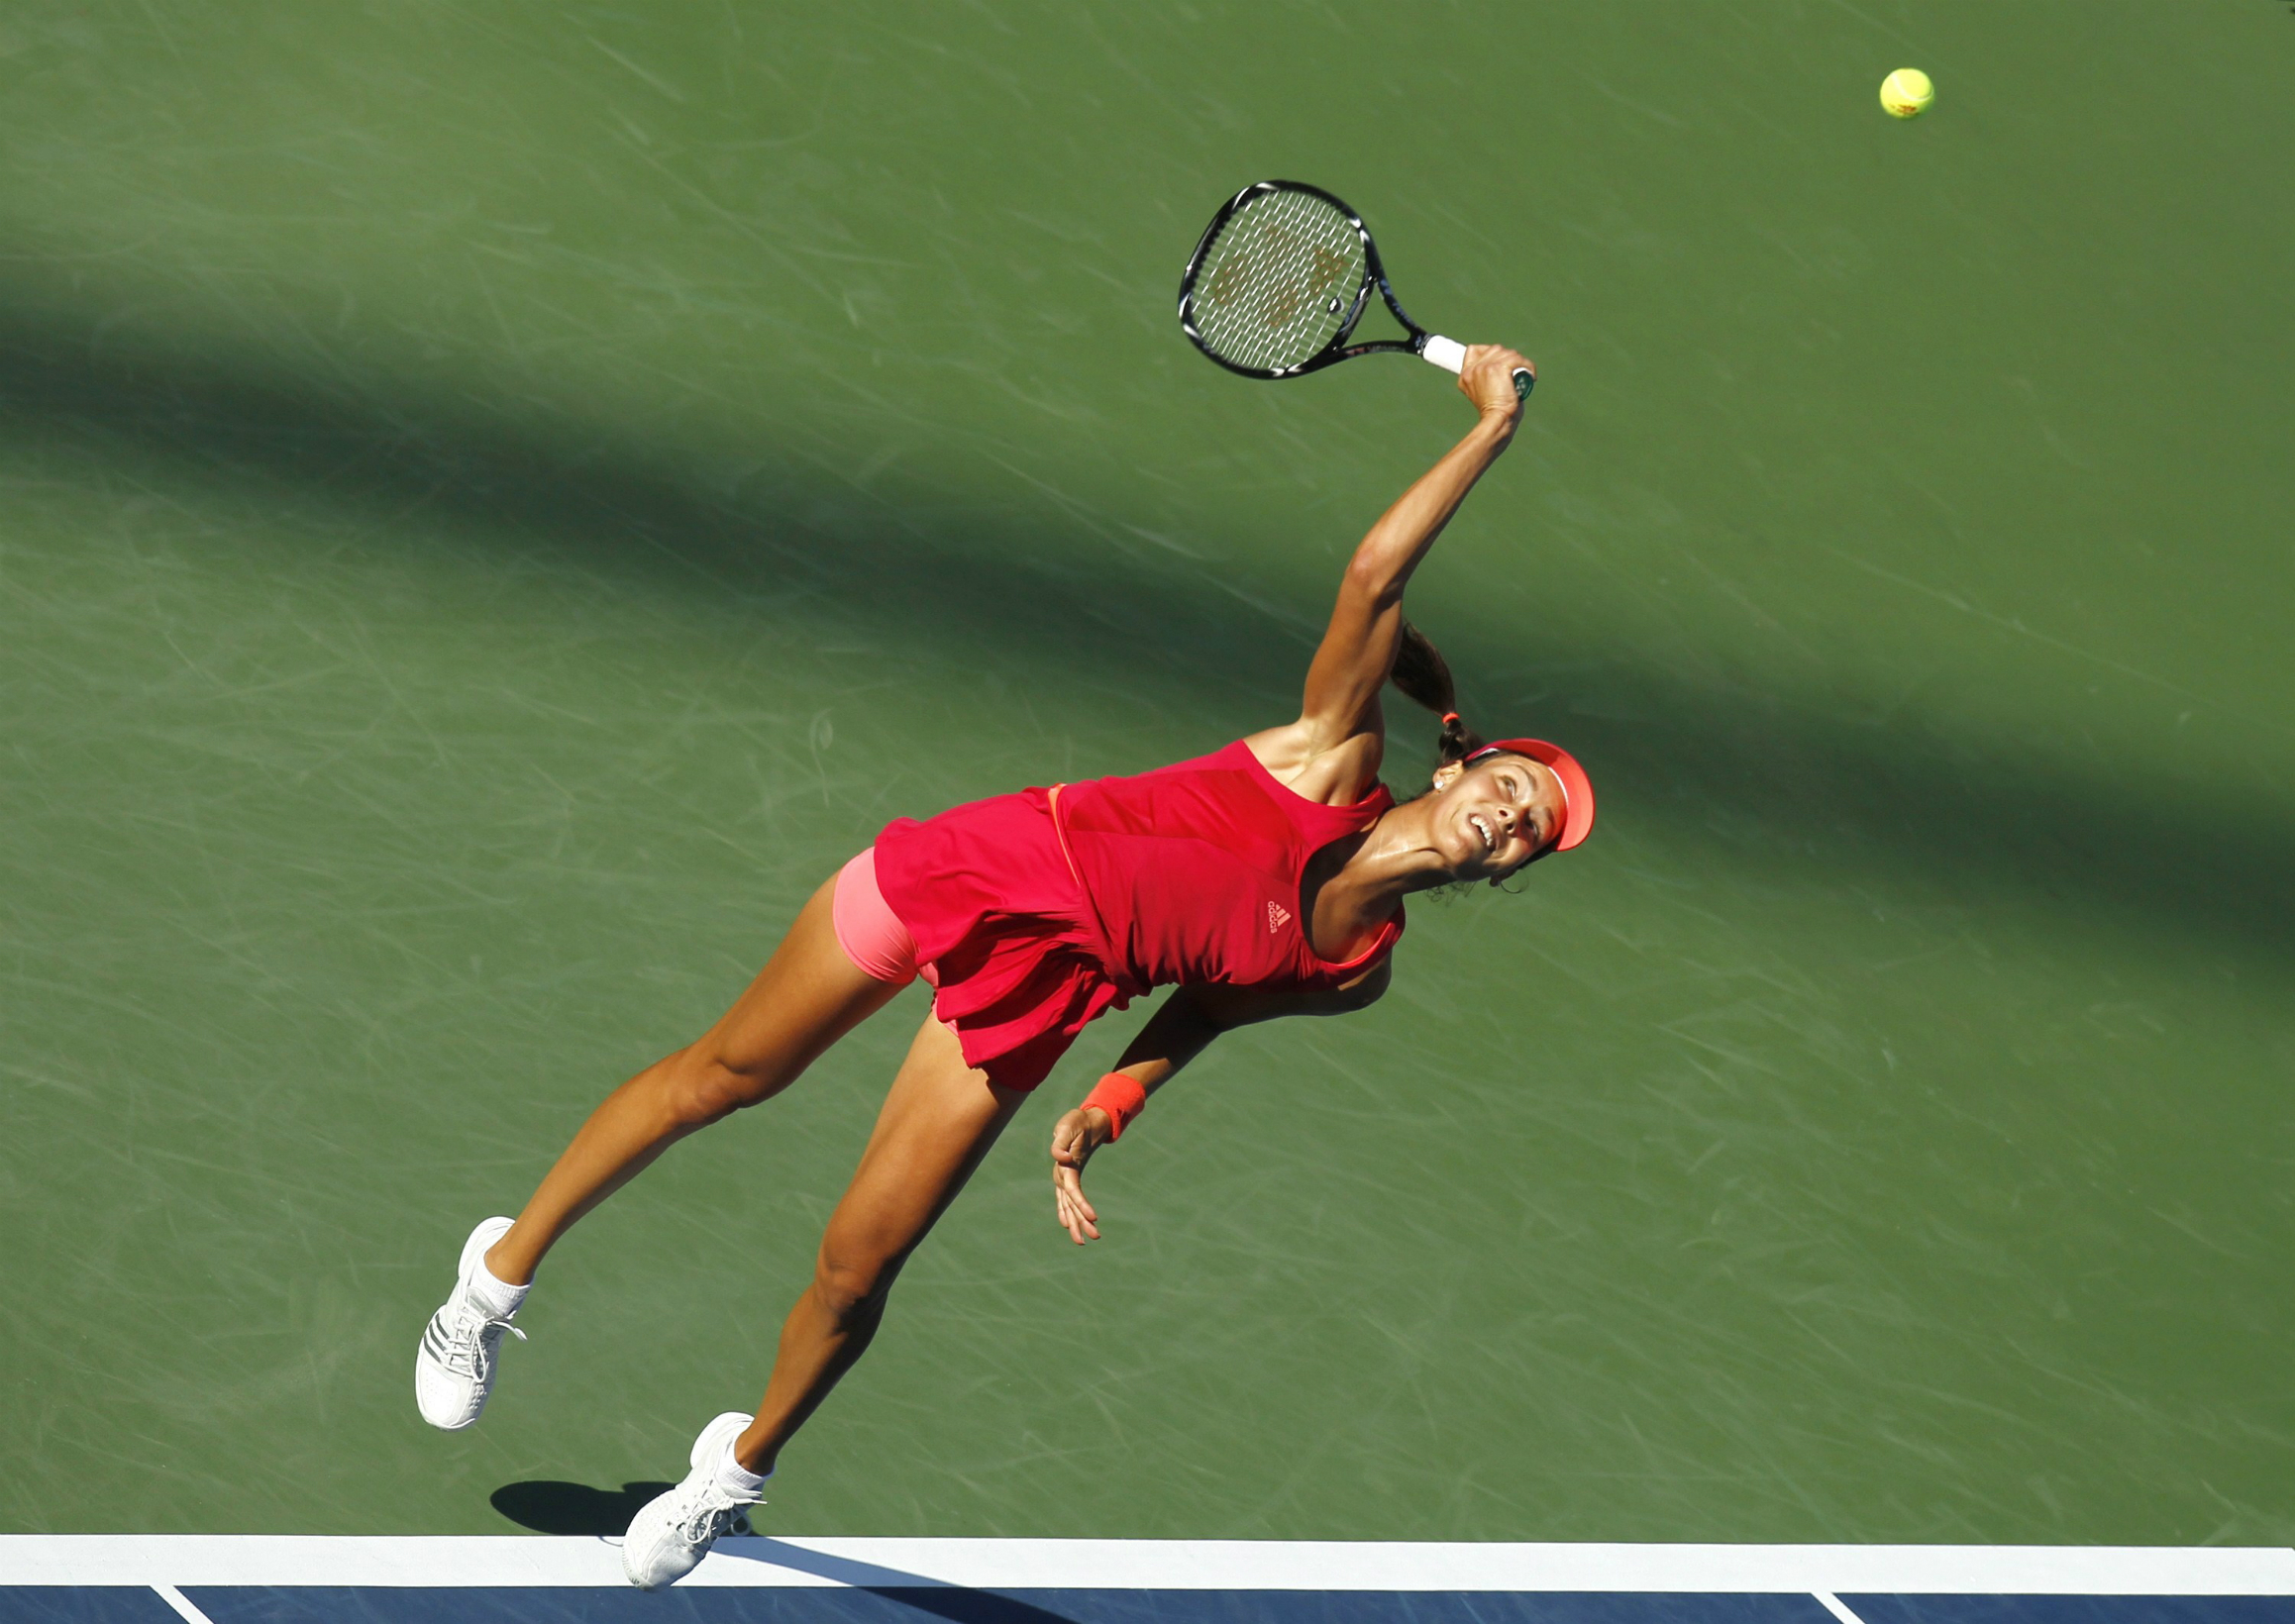 Ana Ivanovic serving a powerful shot in a sports match.